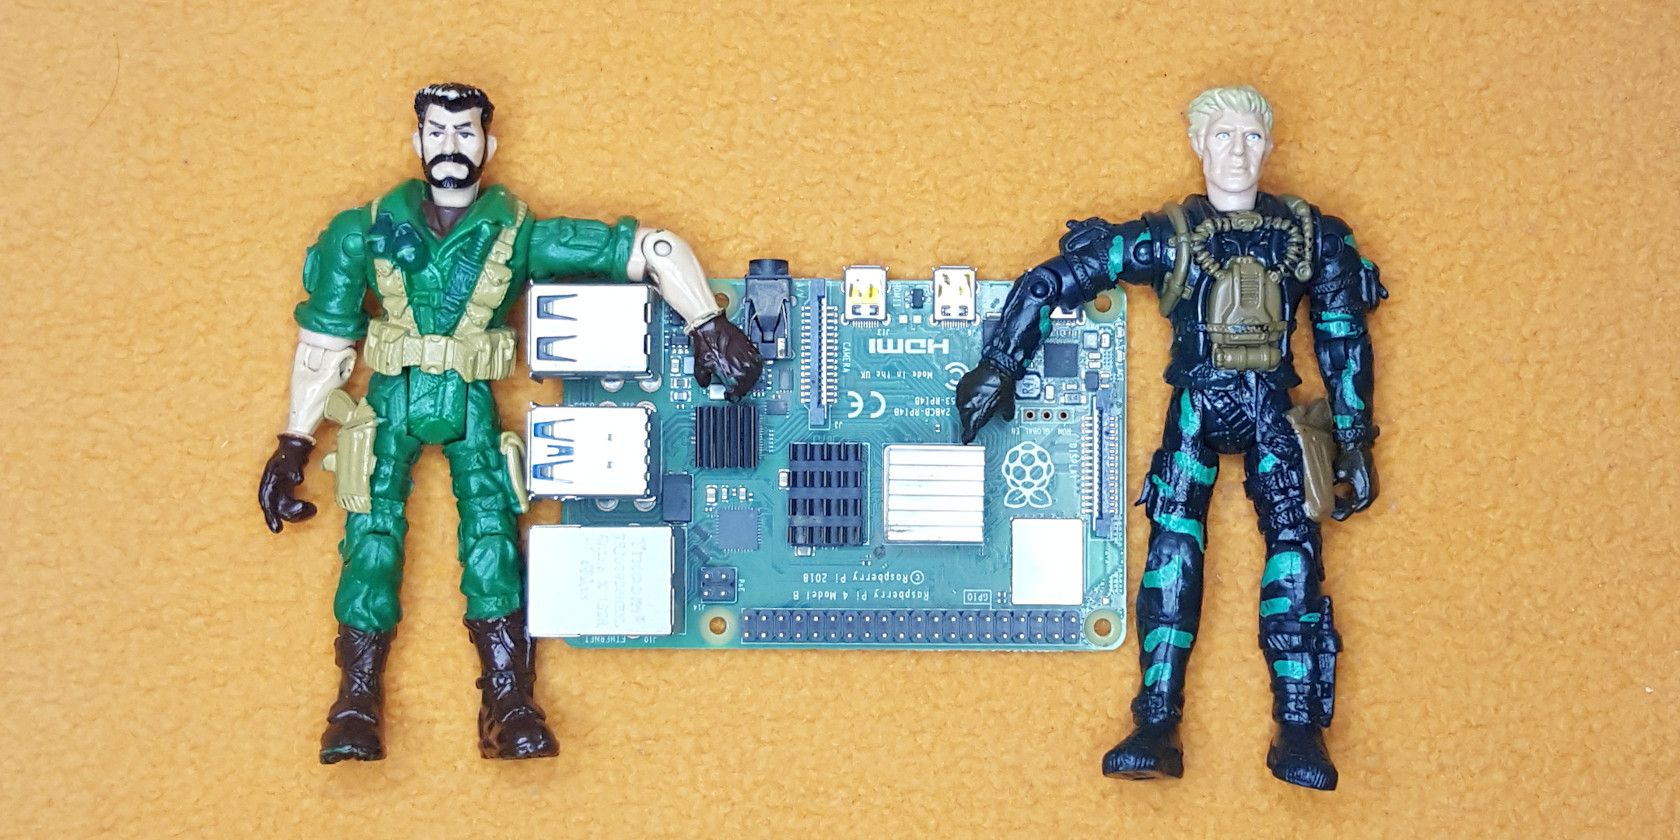 Two Toys Representing Users Holding A Raspberry Pi4